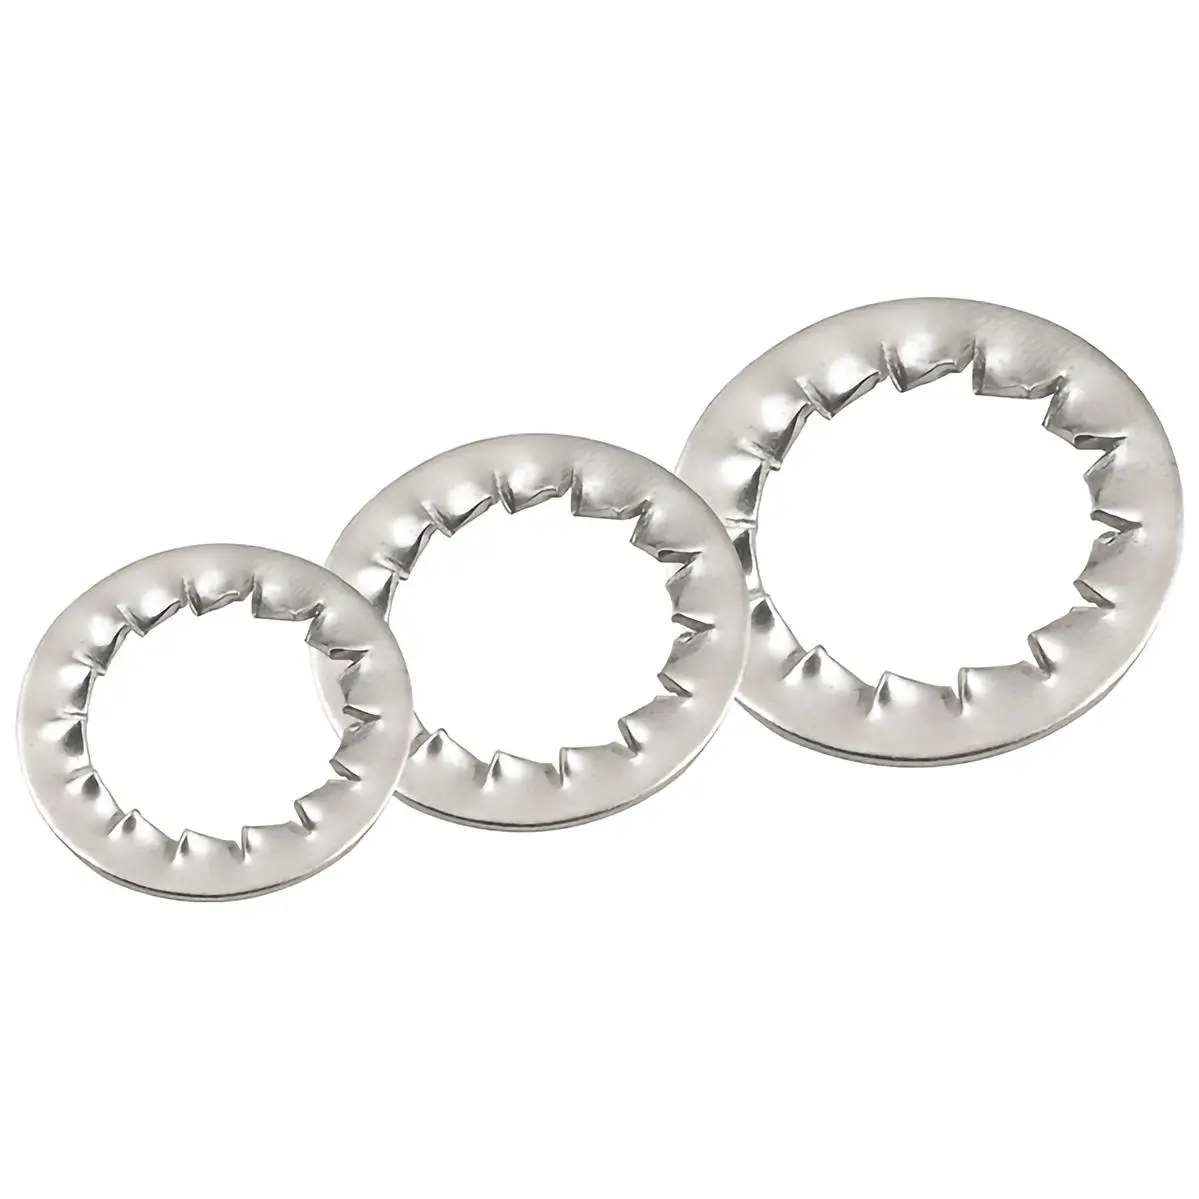 

M2 M2.5 M3 M4 M5 M6 M8 M10 M12 M14 M16 M18 M20 M22 M24 M27 M30 304 Stainless Steel Internal Toothed Serrated Lock Washer Gasket